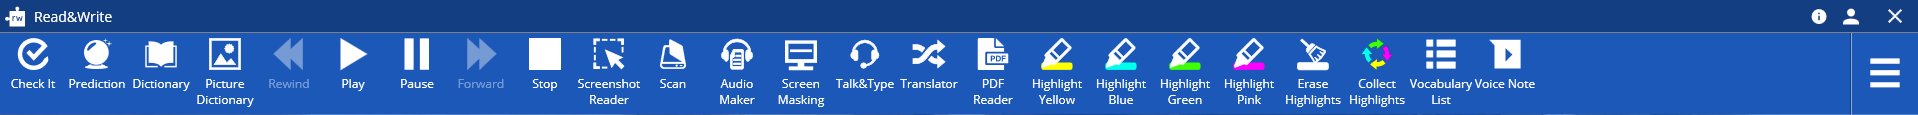 A graphic illustrating the mentioned toolbar concept and functionality of Read & Write.